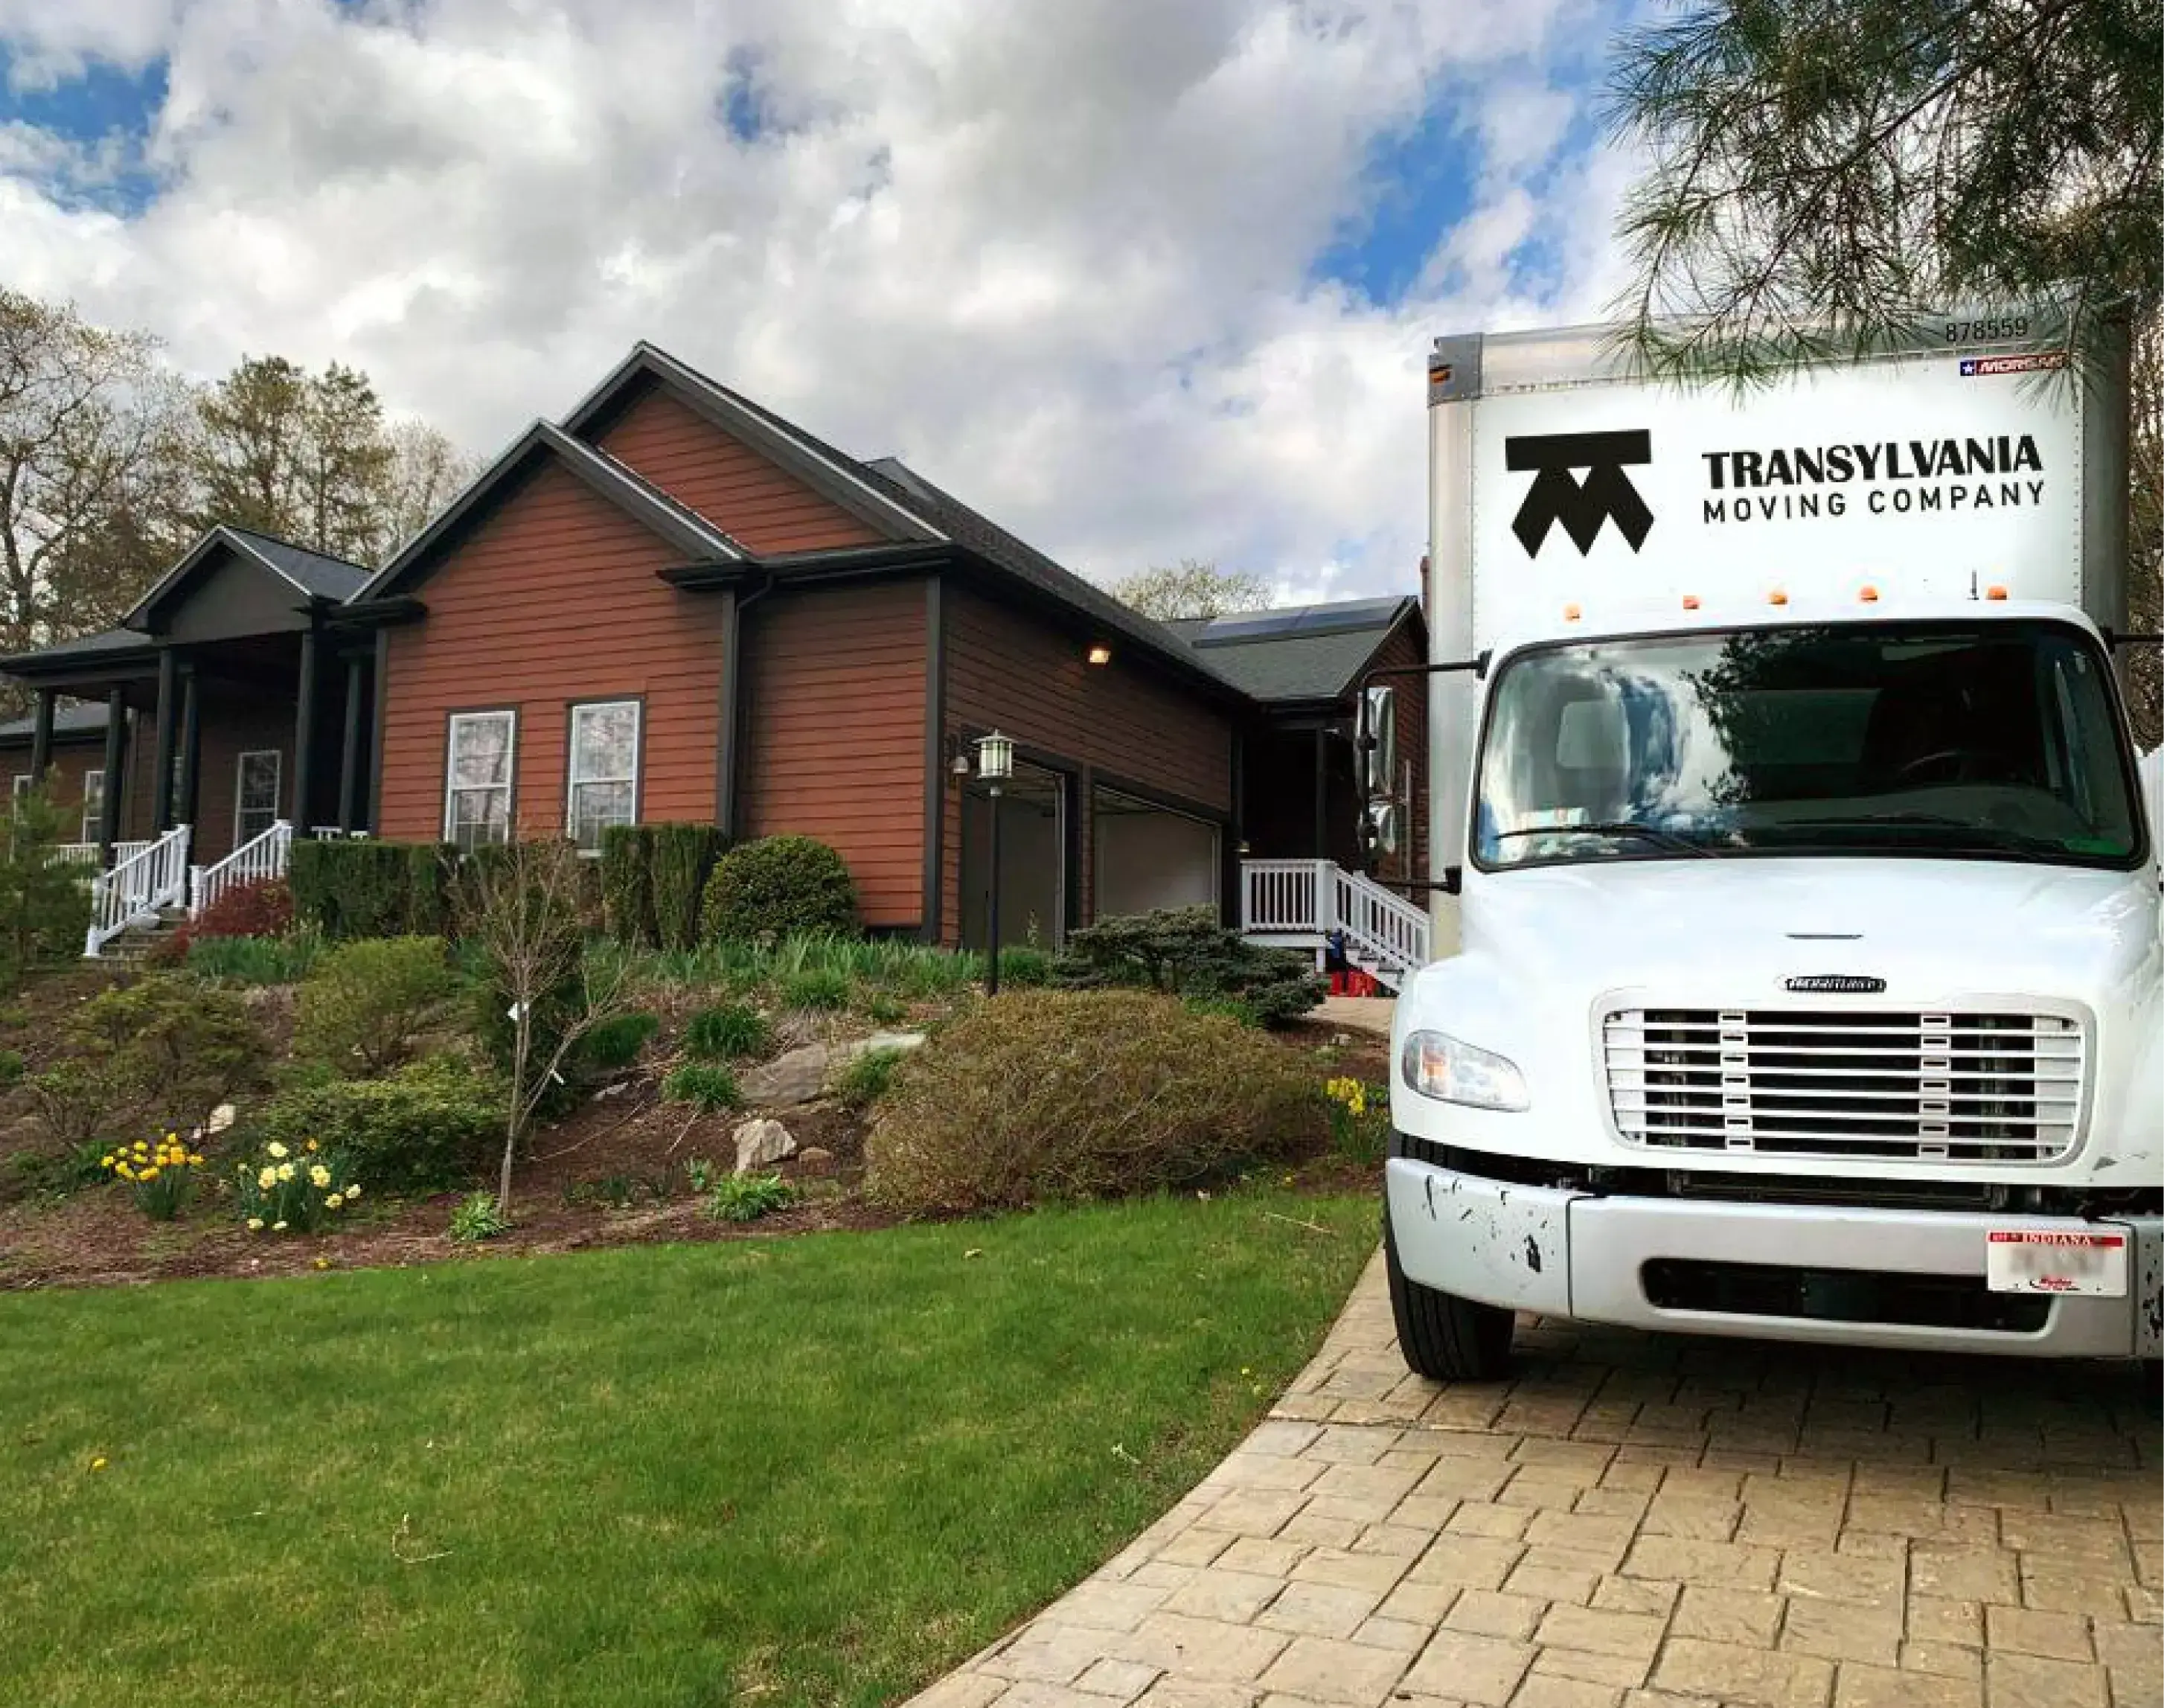 Transylvania moving company truck parked in a customer's driveway